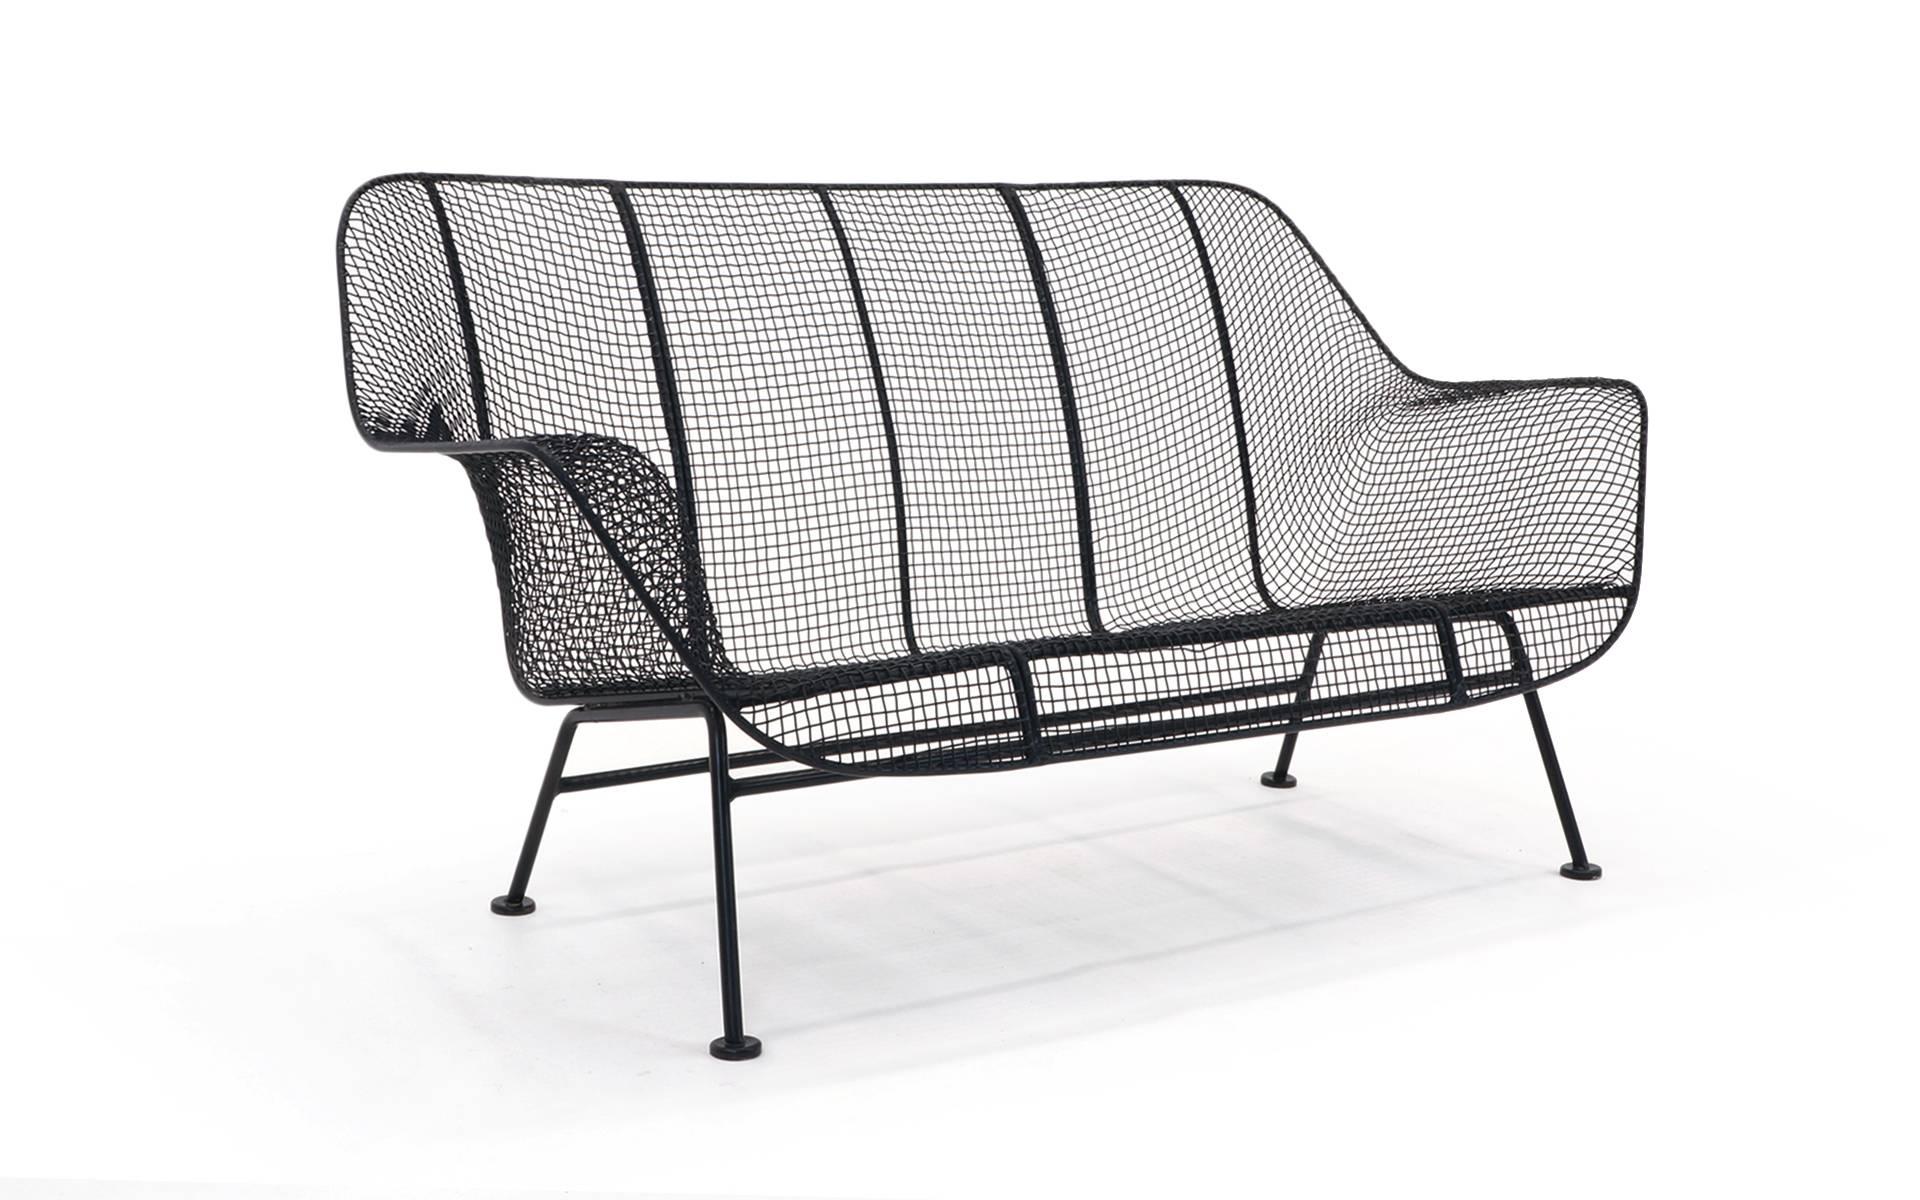 Russell Woodard "Sculptura" Settee.  Professionally media blasted and powder coated in a satin black finish.  This has never been outdoors since.  Structurally excellent as well.  